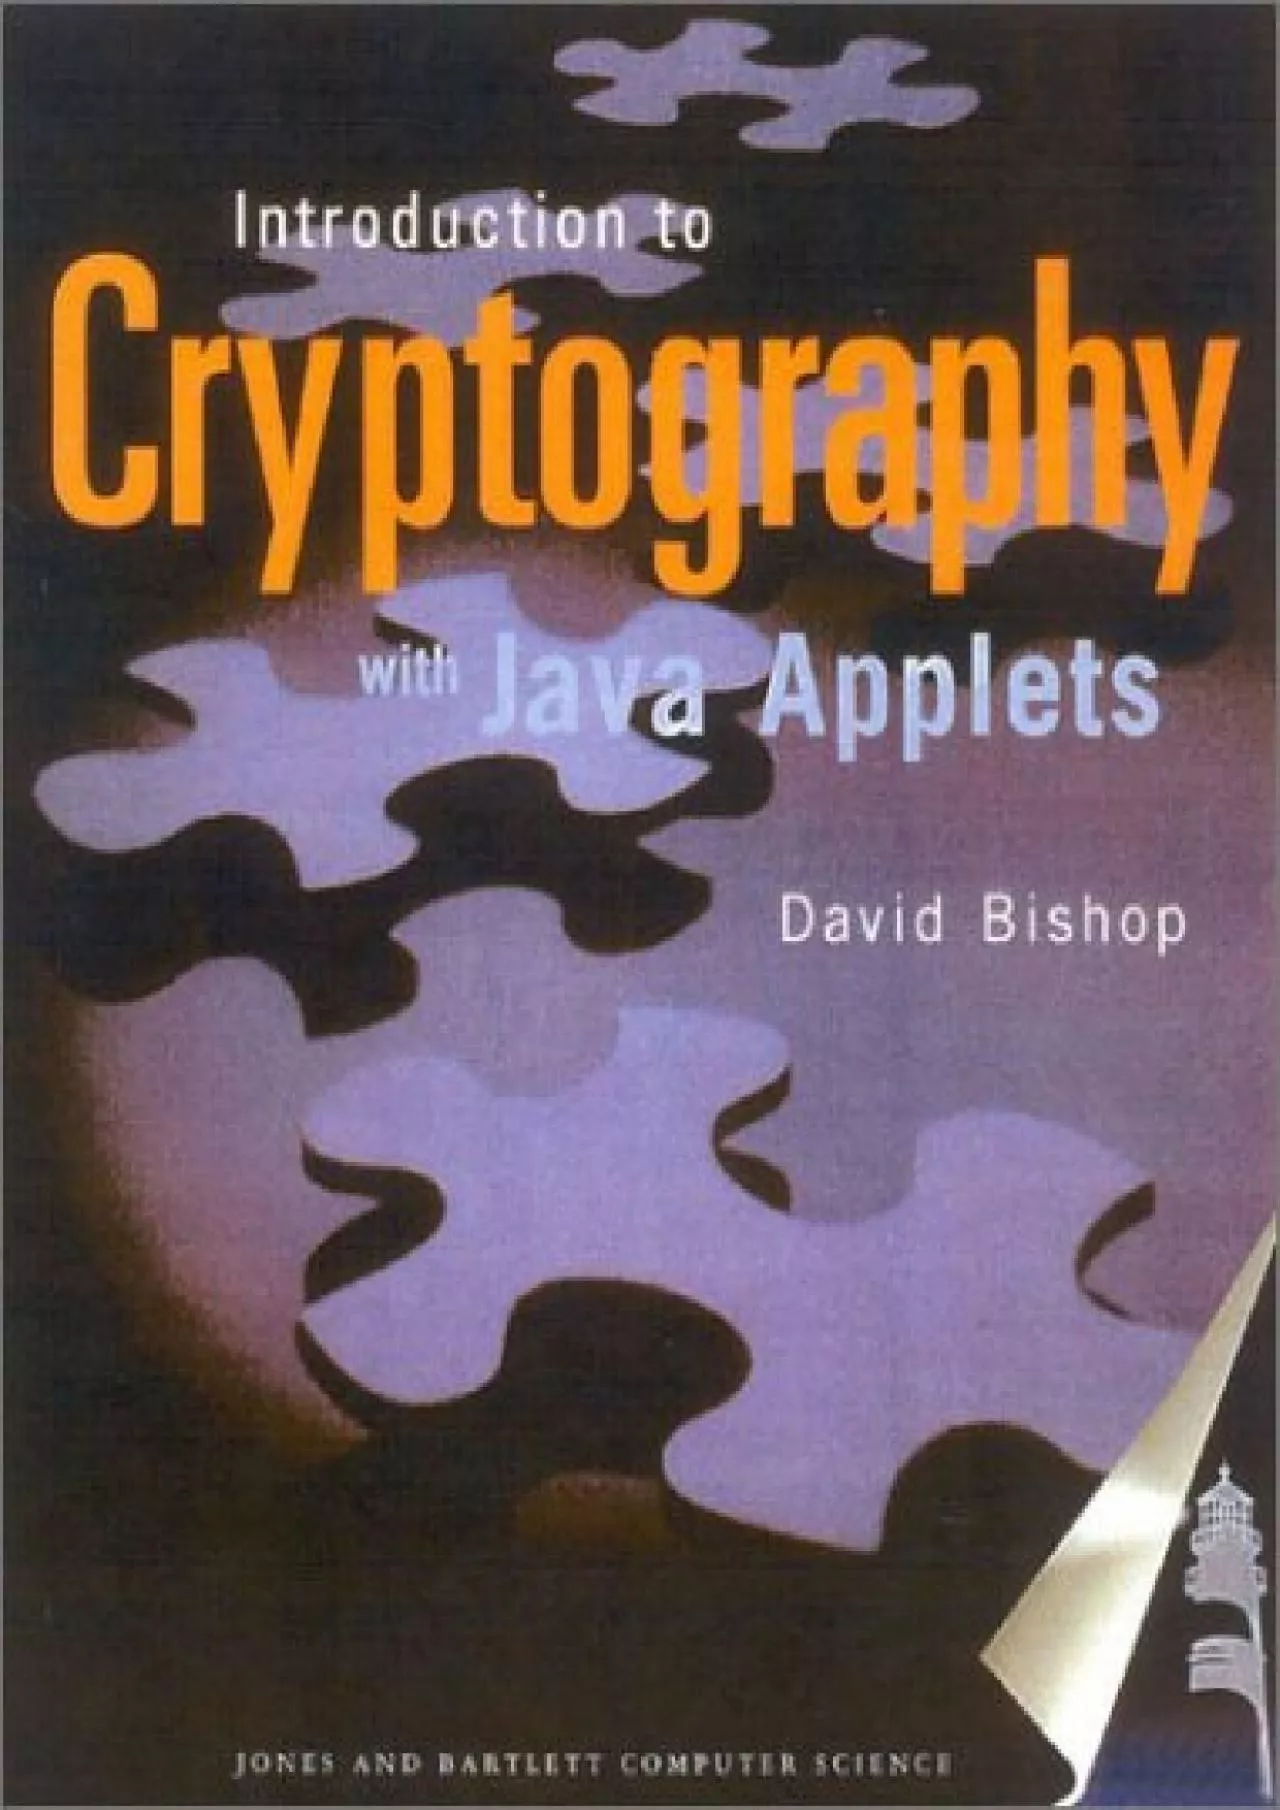 [READING BOOK]-Introduction To Cryptography With Java Applets